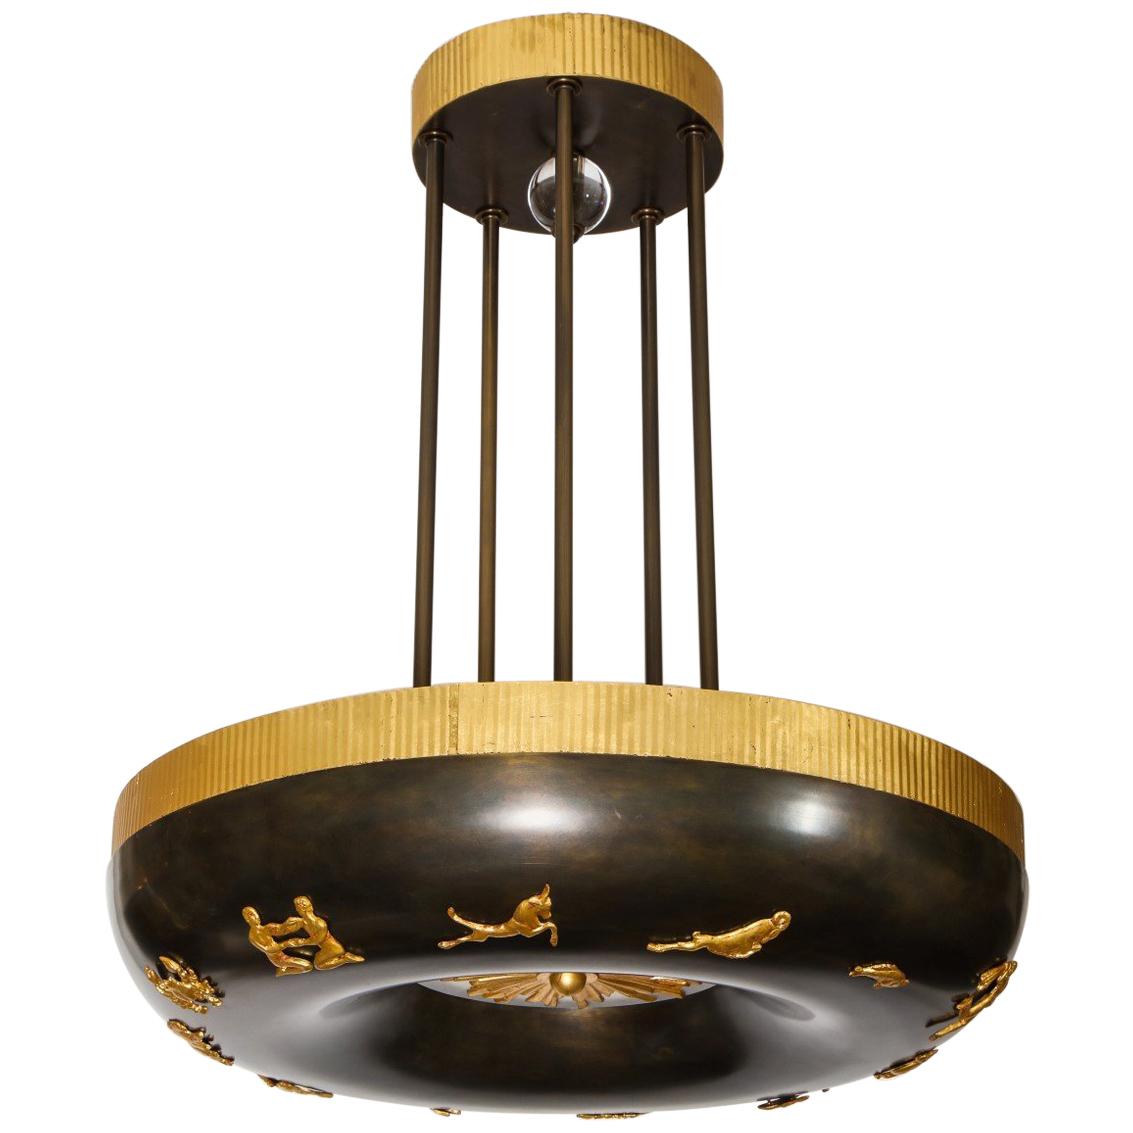 A new, Swedish Grace period inspired light by David Duncan. This pendant light features 12 cast bronze zodiac signs around the frame. The underside with frosted glass insert and a gorgeous cast bronze sunburst with gold leaf finish. This fixture